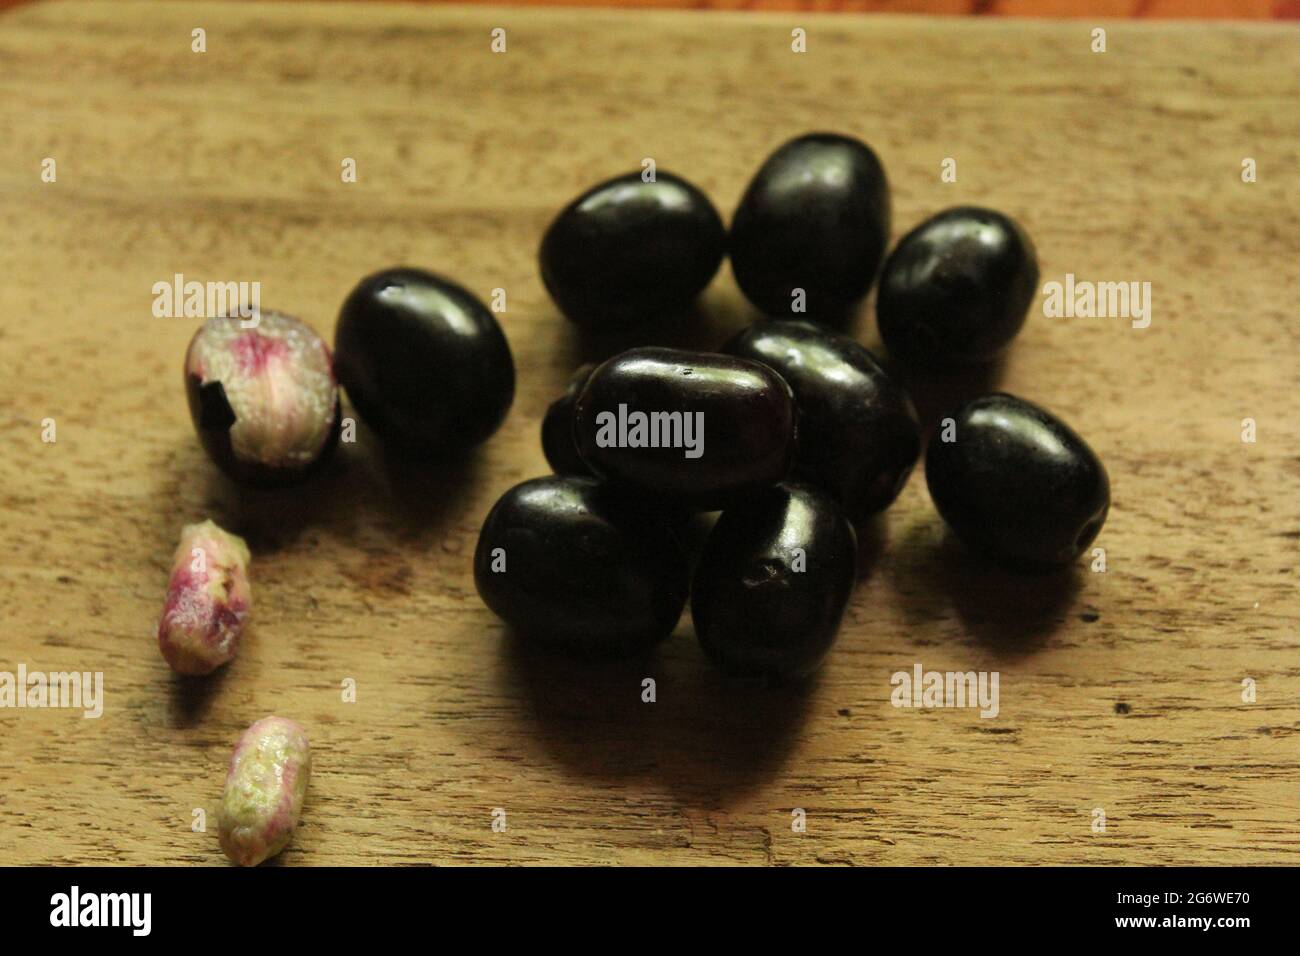 Java plum fruits or syzygium fruit on isolated wooden surface, top view, blue berry fruit, new image Stock Photo